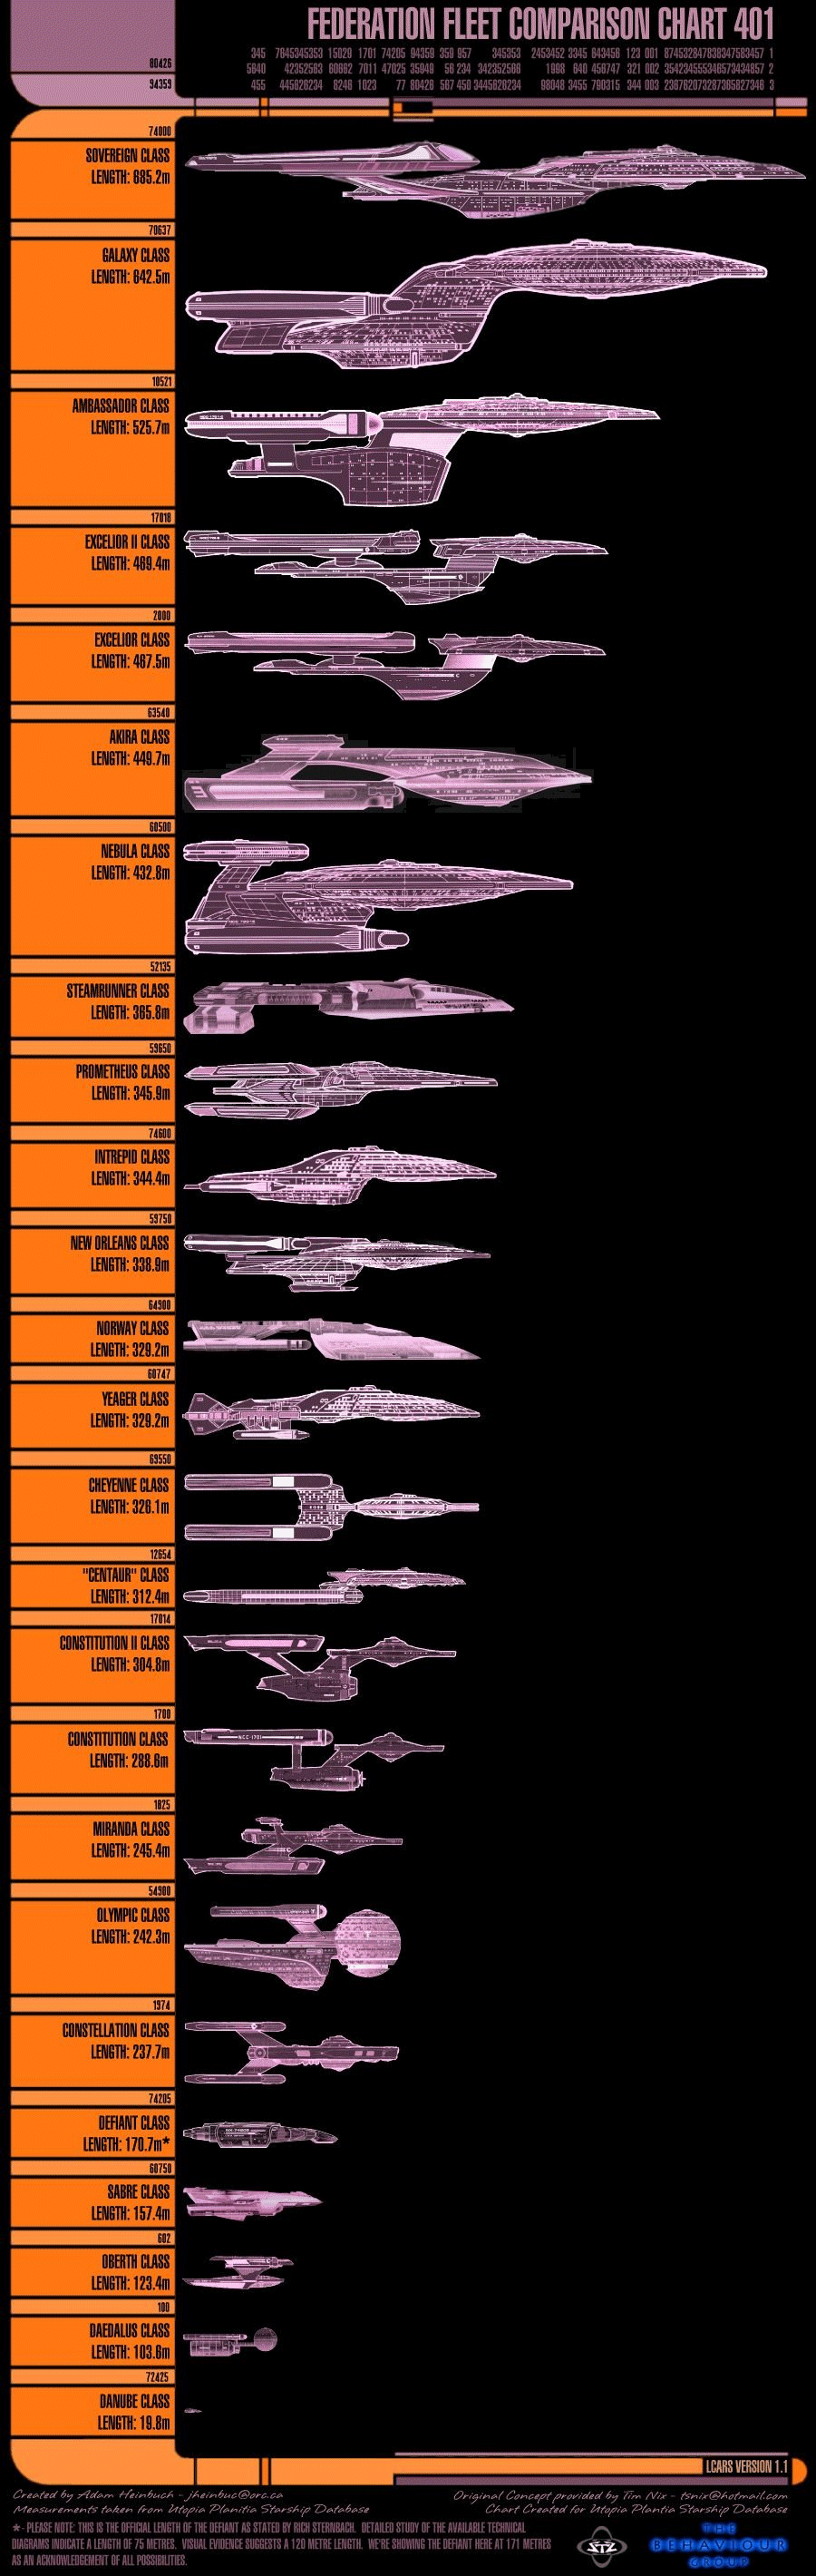 Comparison of Federation Vessels